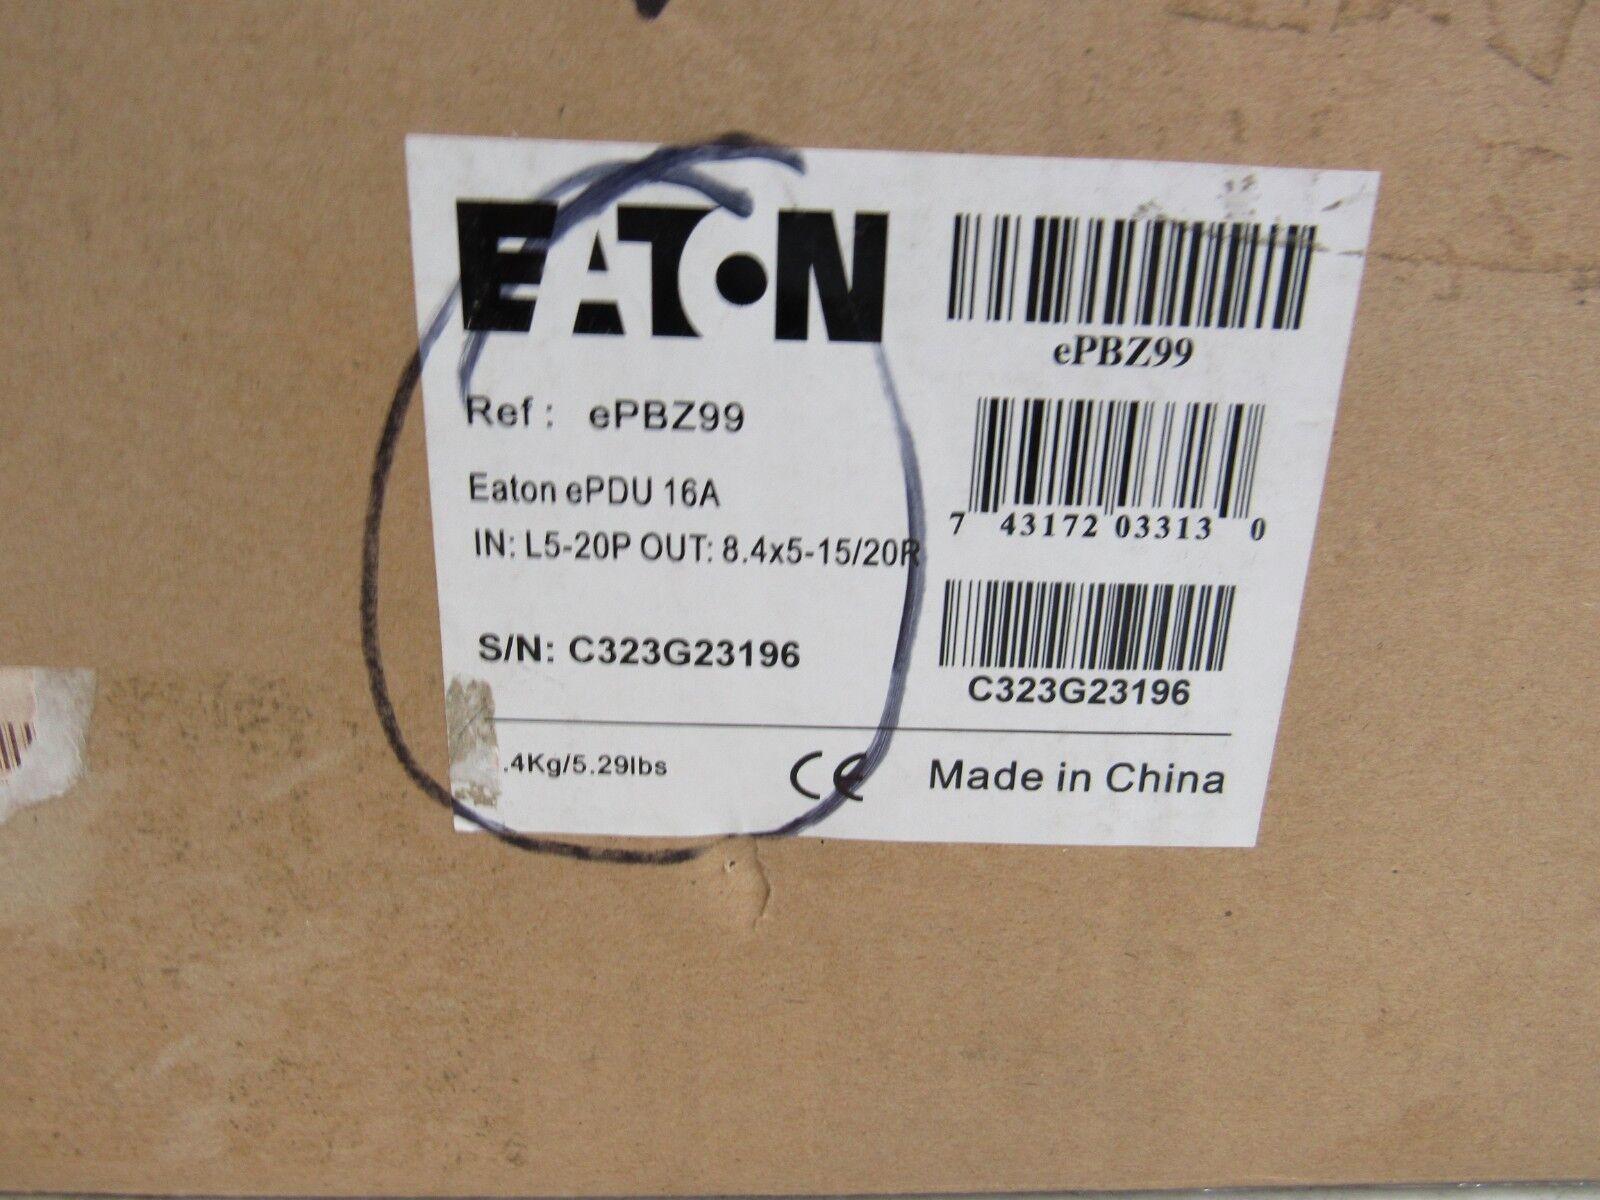 Primary image for Eaton ePBZ99 1920W 12 5-20R Outlet Rackmount Power Distribution Unit 41-5